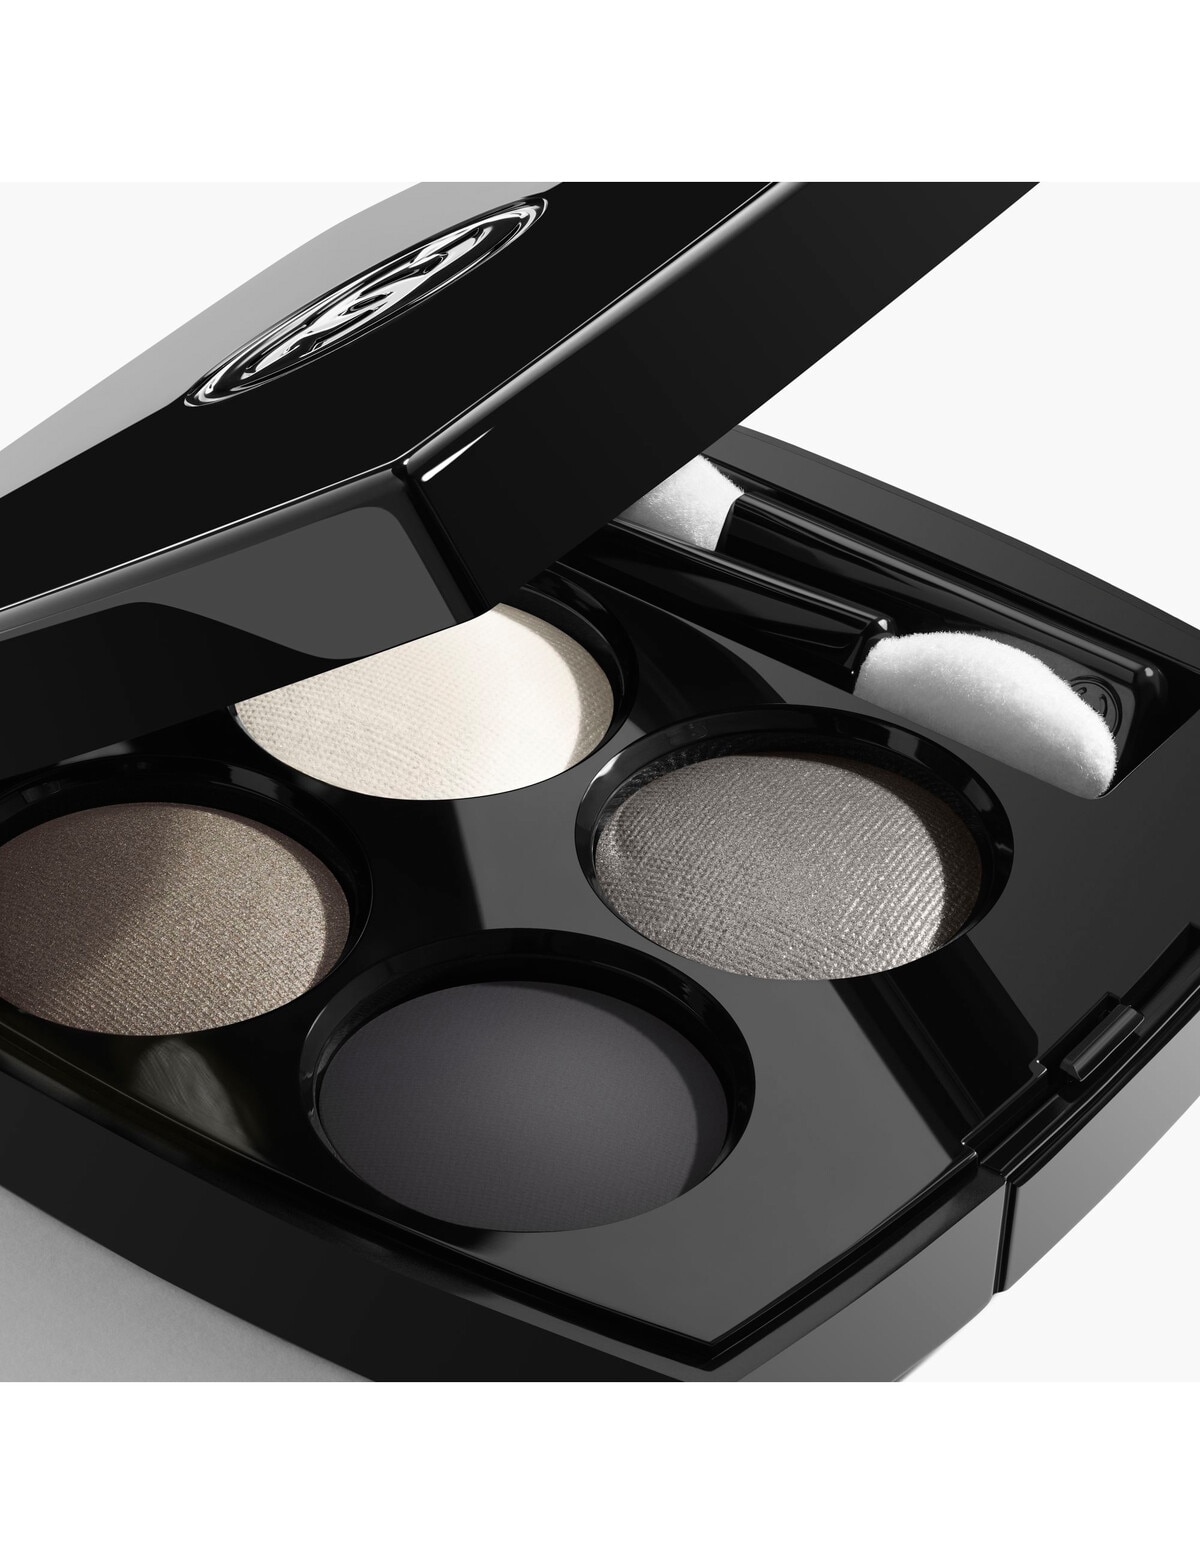 Chanel Modern Glamour (334) Eyeshadow Quad Review & Swatches